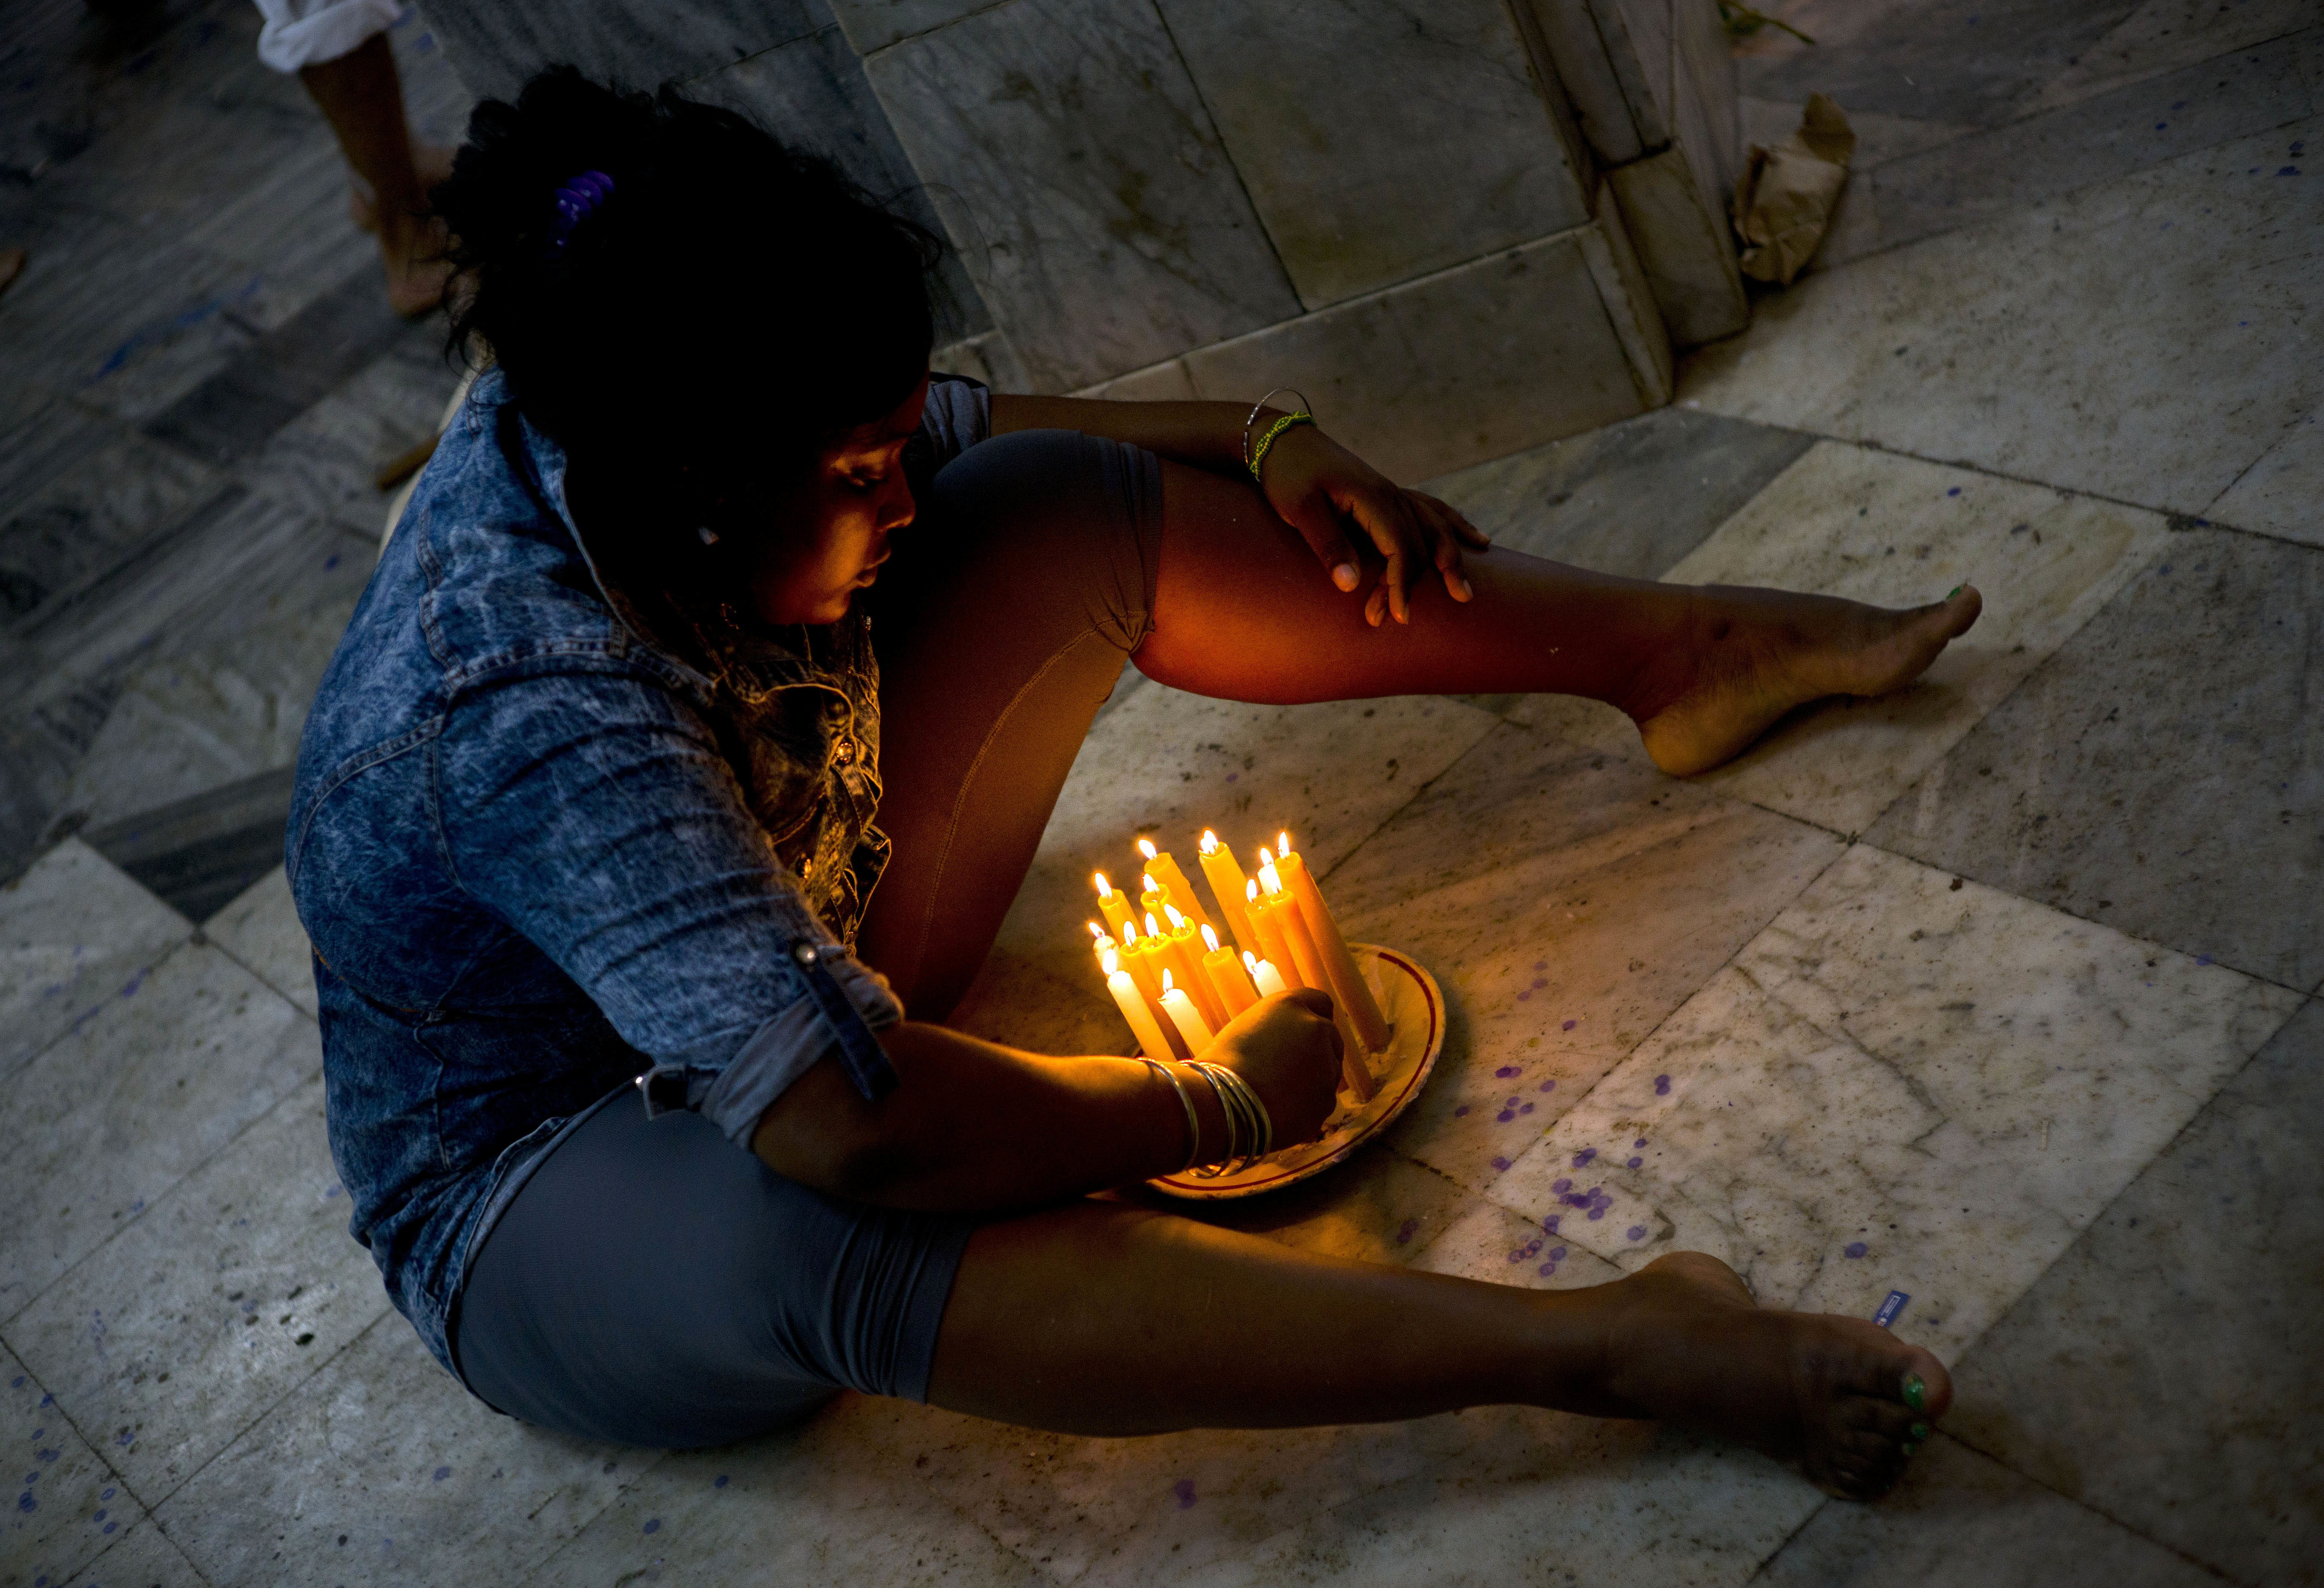 Wirnea, who declined to give her last name, lights a plate of candles on the church floor as she ends her pilgrimage to Saint Lazarus' shrine in El Rincon, an area of Santiago de las Vegas, Cuba, late Friday, Dec. 16, 2016. Wirnea said she came to thank the saint for granting her health-related request made on her first pilgrimage last year. The Catholic saint is also known as the Afro-Cuban Yoruba deity Babalu-Aye, protector of the sick, an example of Cuba's religions syncretism. His feast day is every Dec. 17. (AP Photo/Ramon Espinosa)